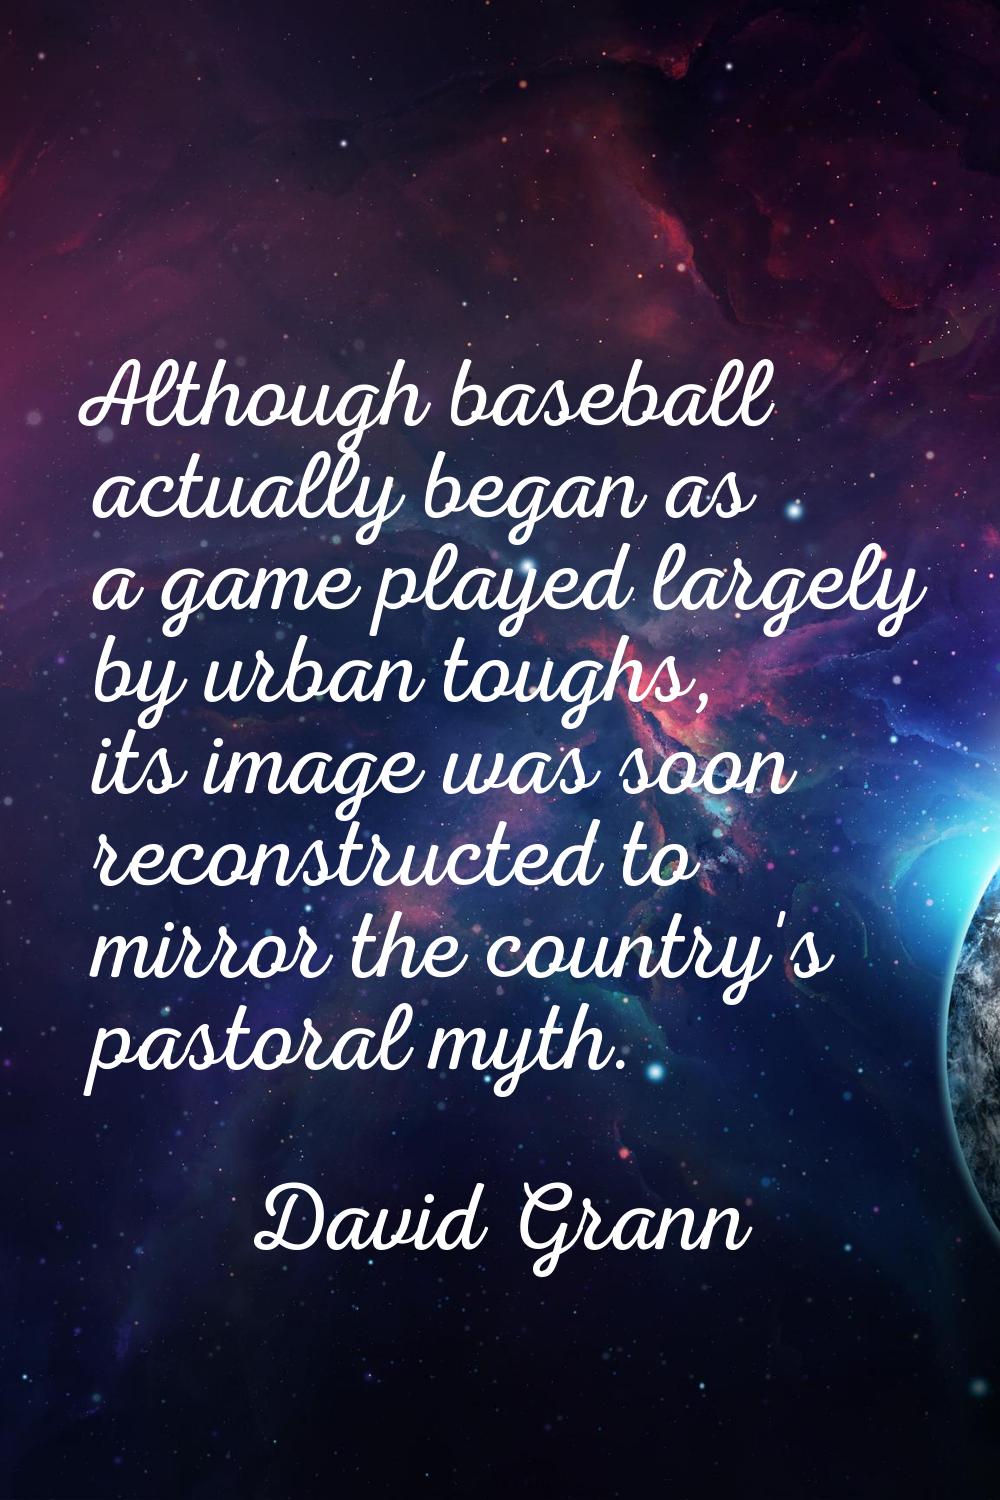 Although baseball actually began as a game played largely by urban toughs, its image was soon recon